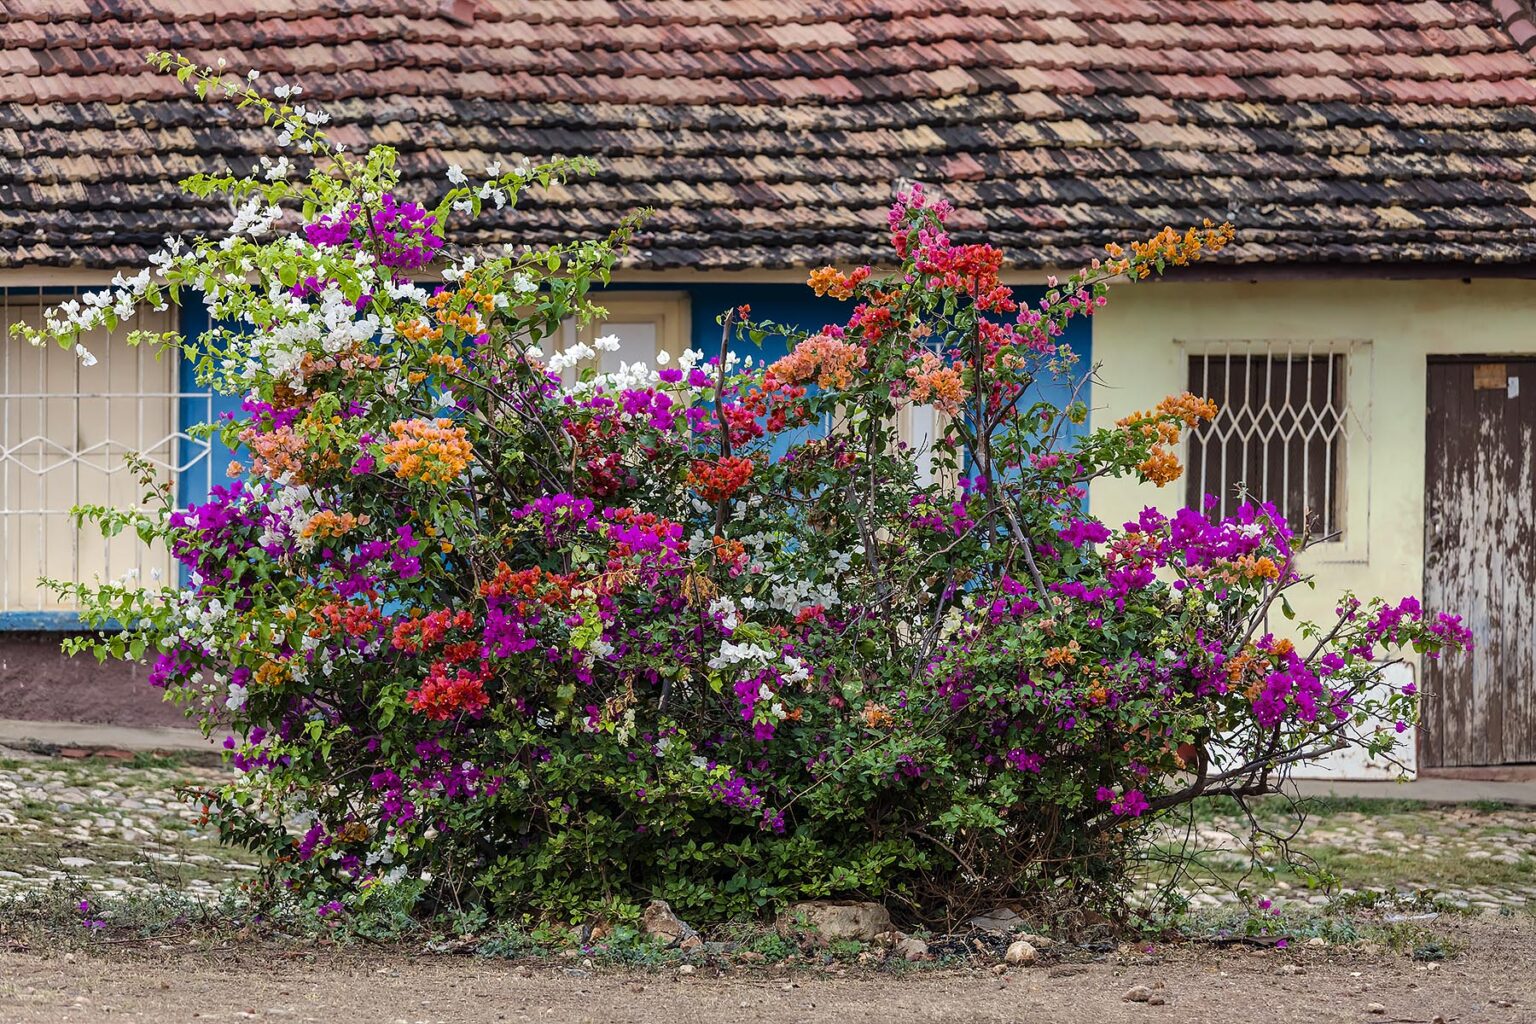 BOUGAINVILLEA in bloom in a plaza with traditional Spanish style houses - TRINIDAD, CUBA